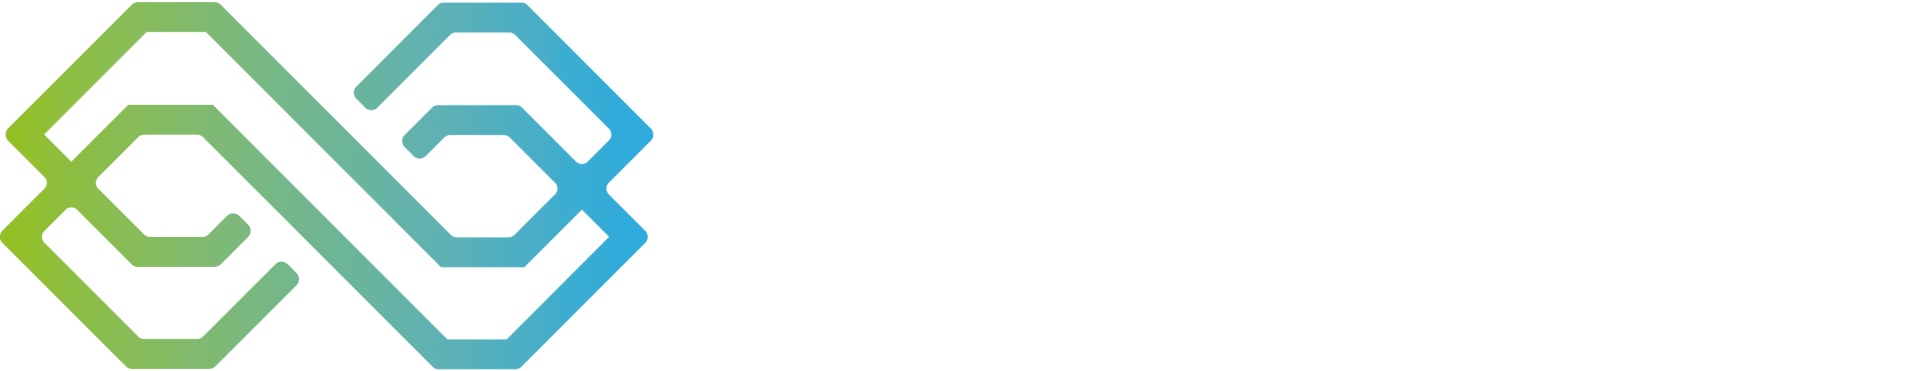 Gronover Consulting GmbH logo